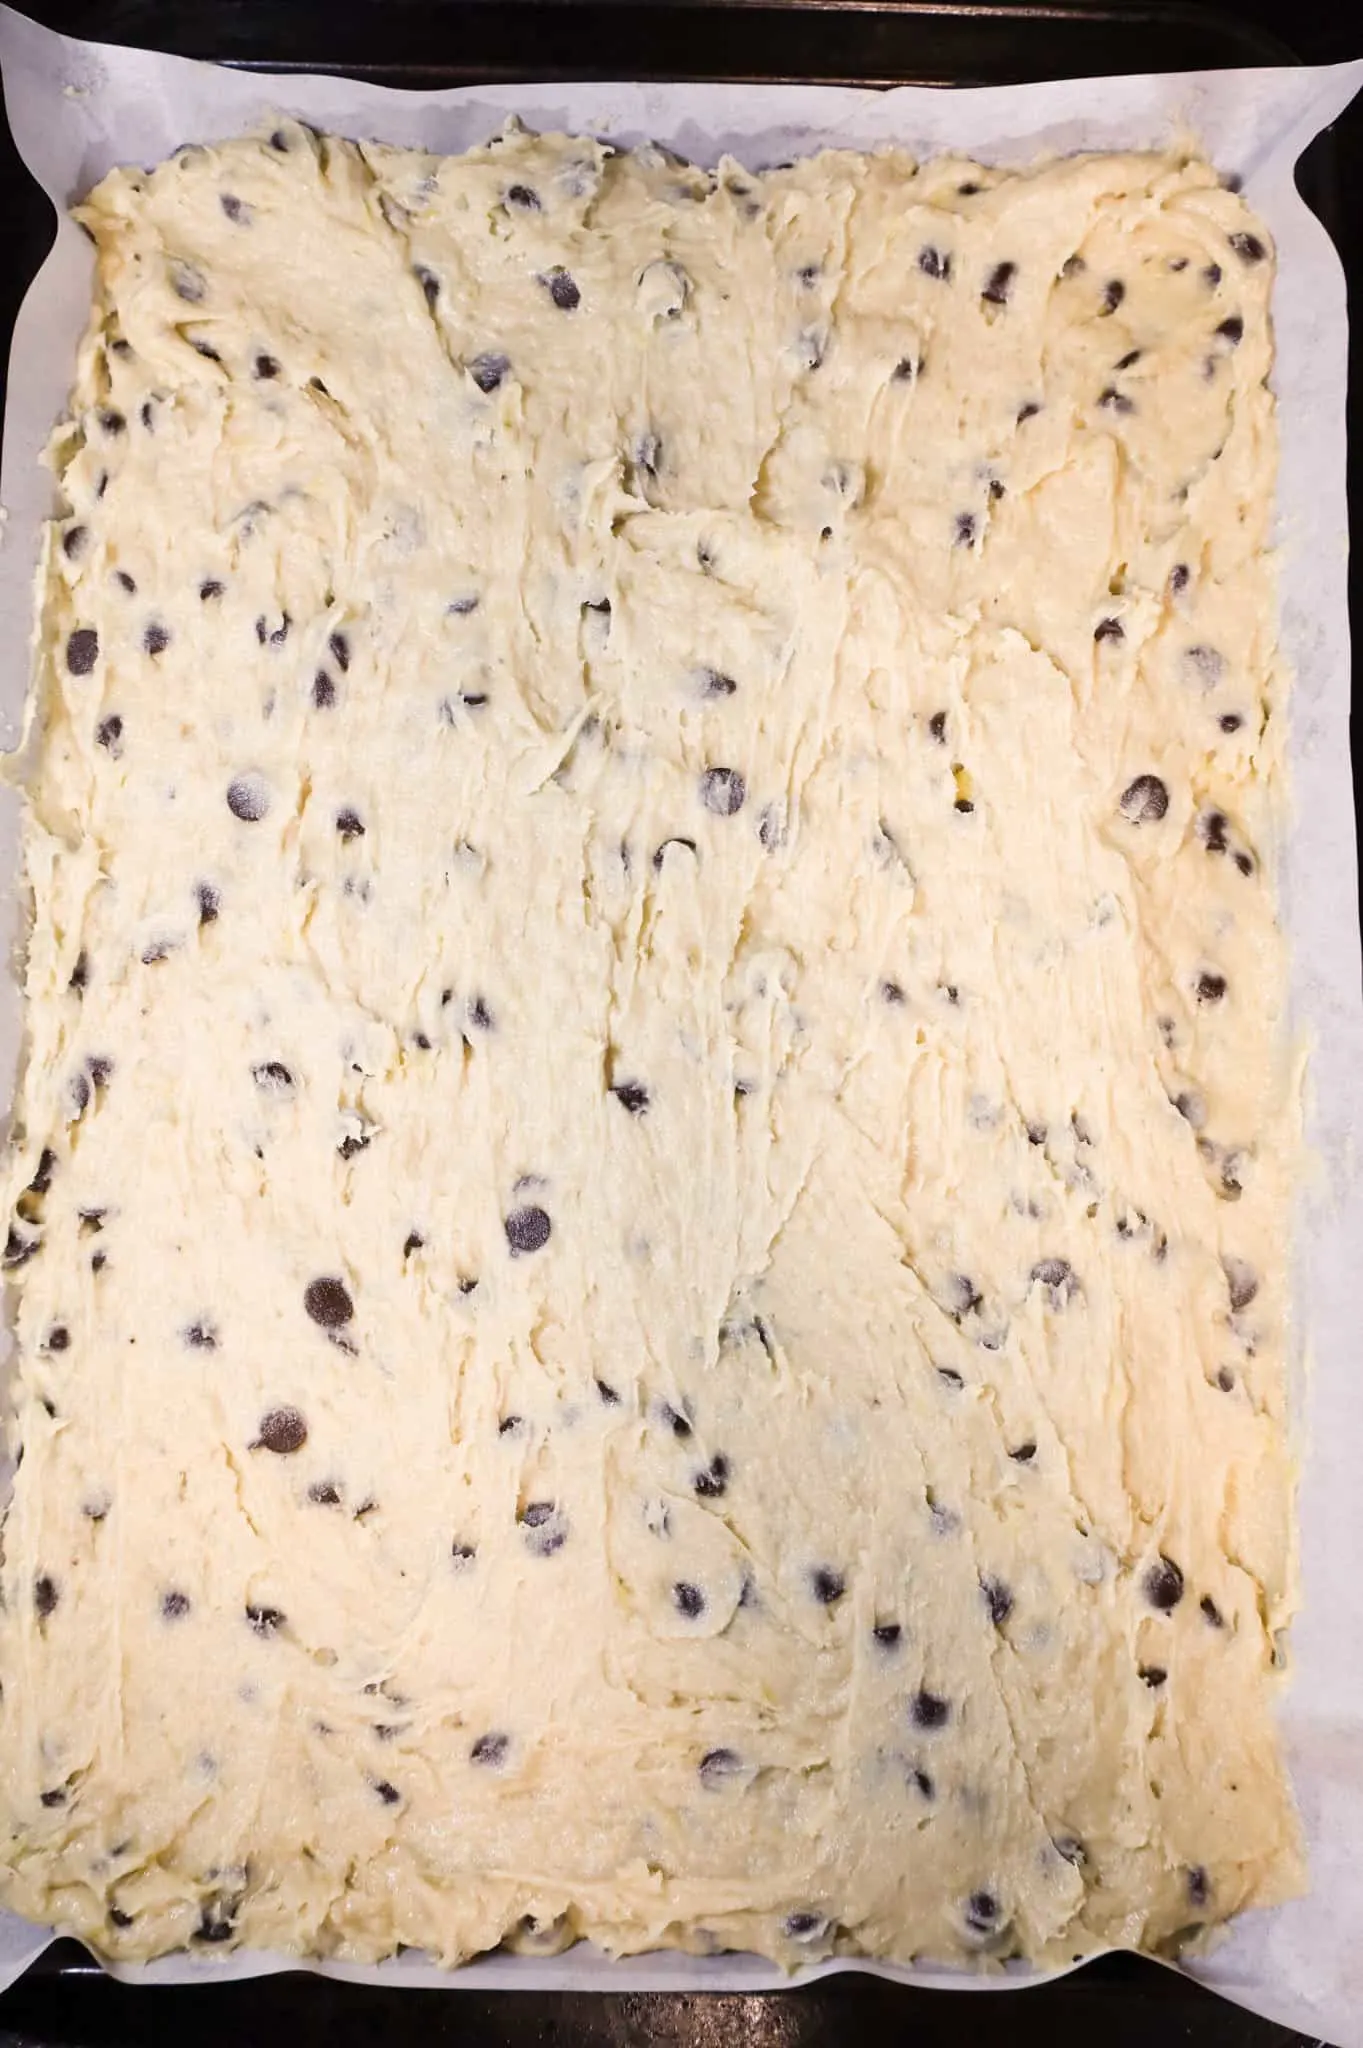 chocolate chip banana bar batter mixture spread in a parchment lined 10 x 15 inch baking sheet